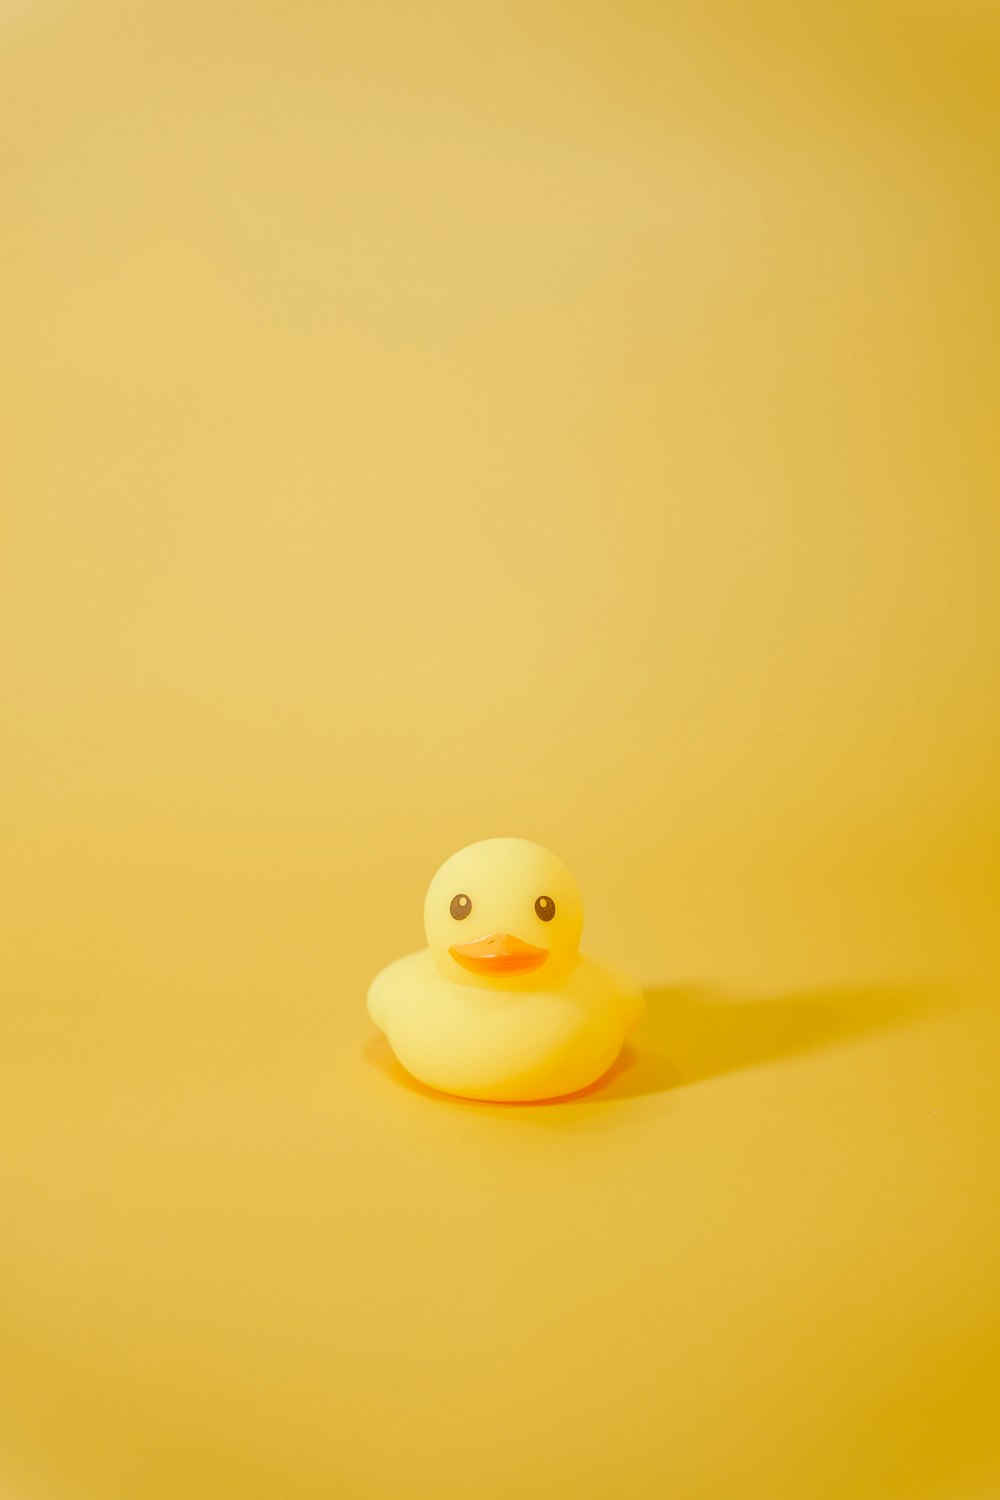 a rubber duck sitting on a yellow surface